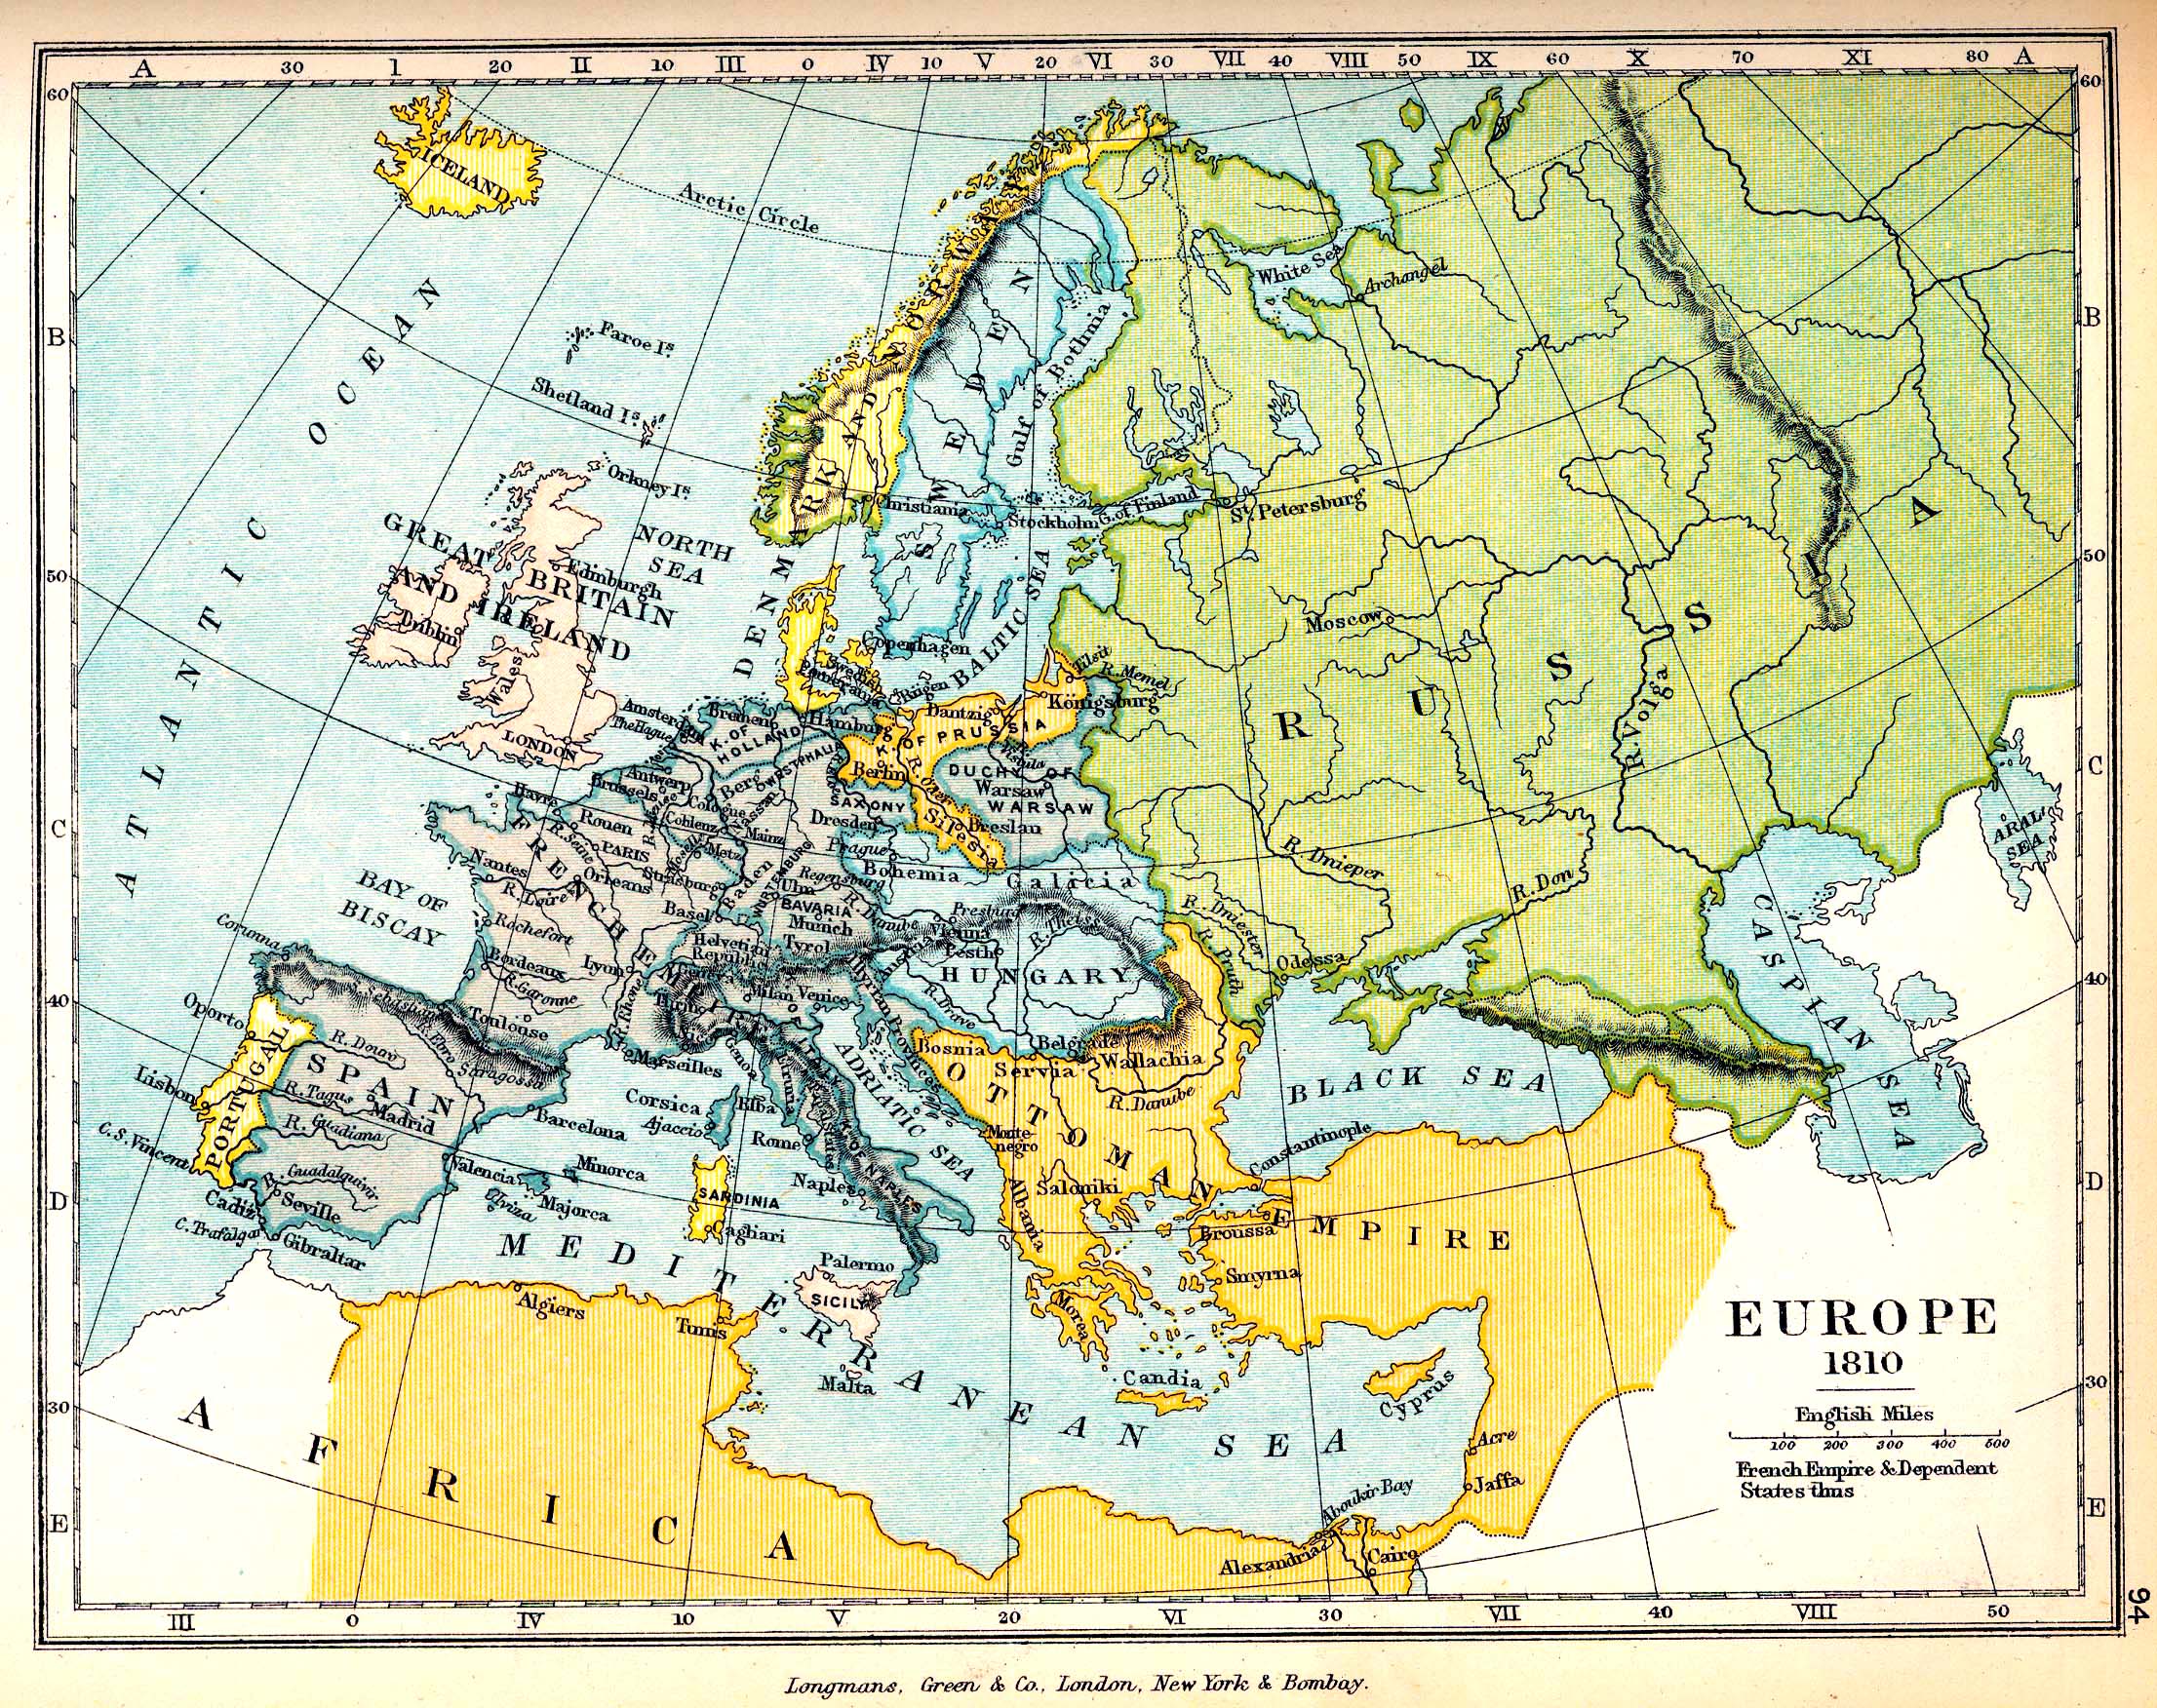 Map of Europe in 1810: The French Empire and dependent States